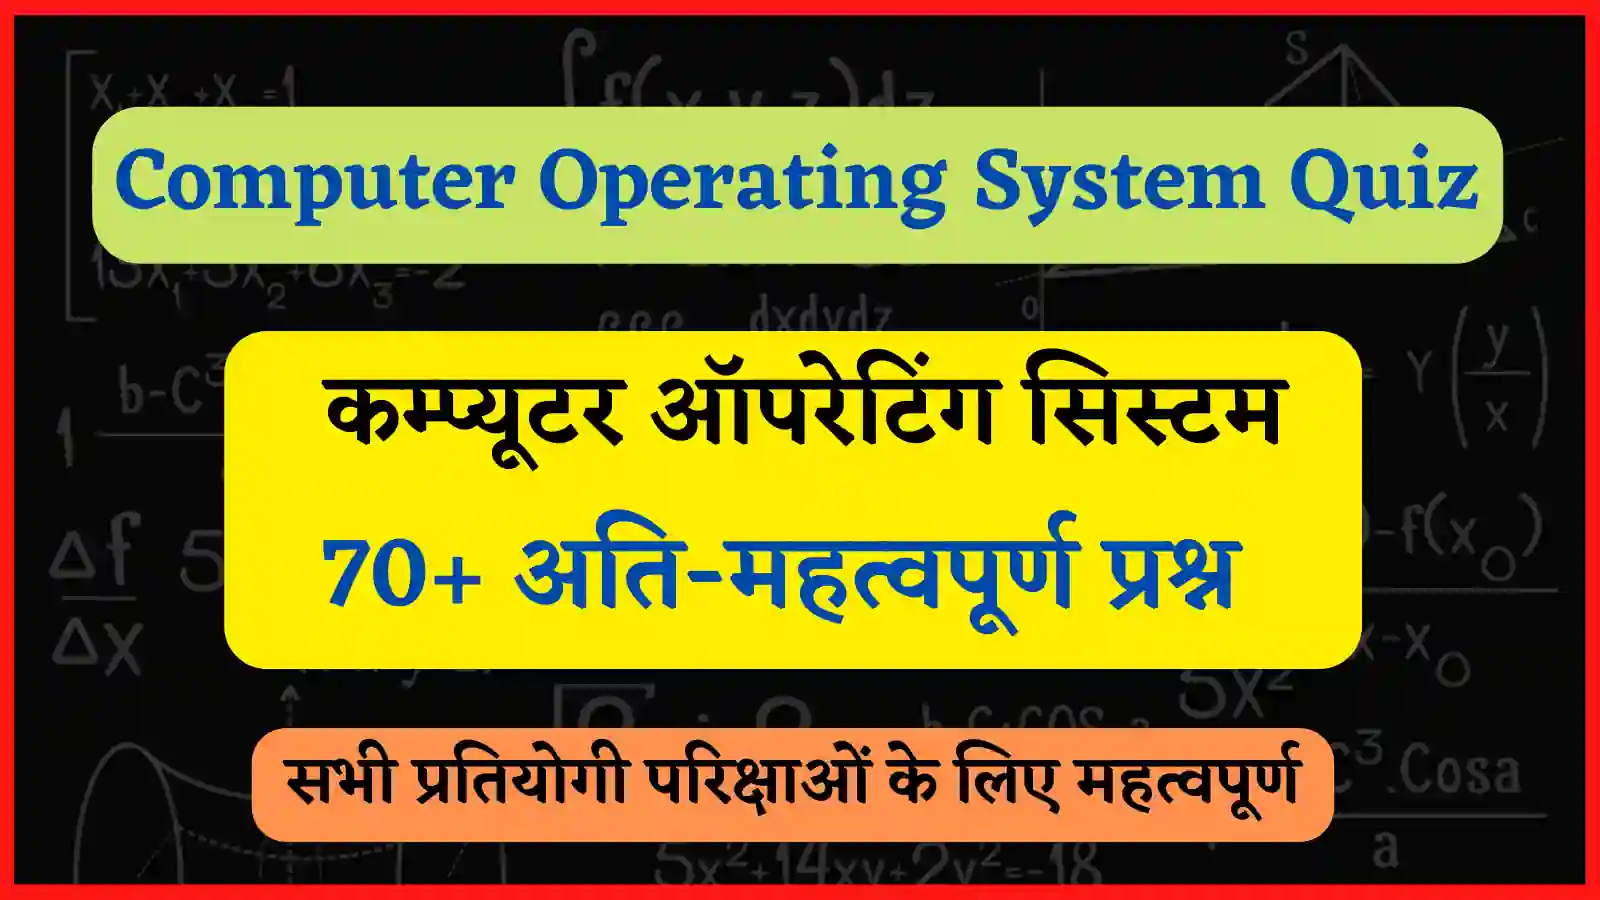 Computer Operating System Quiz in Hindi